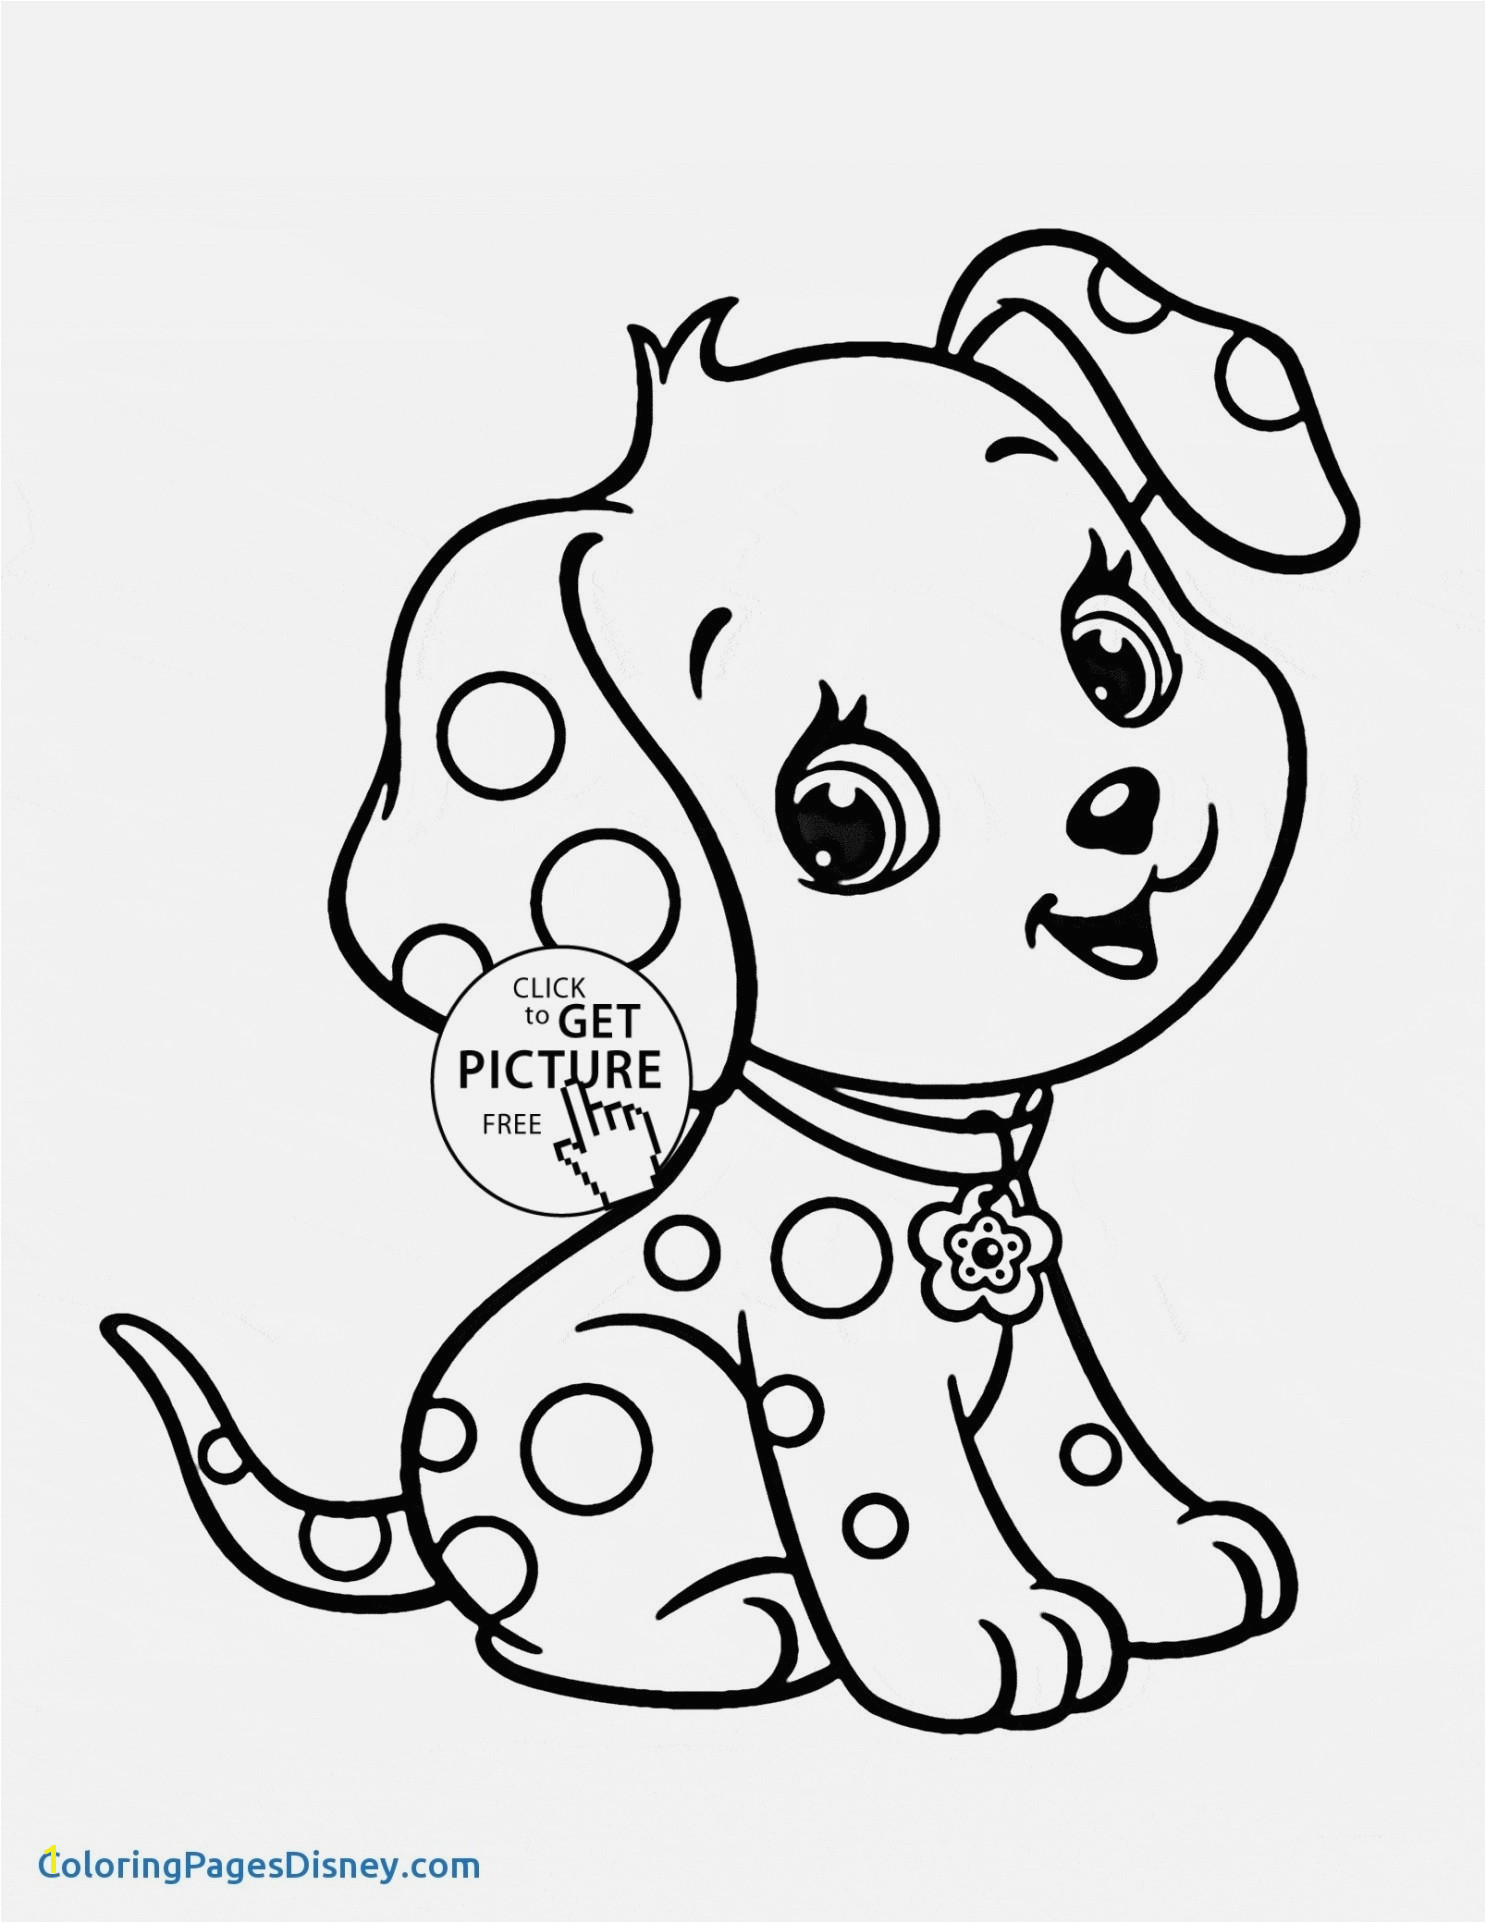 Printable Coloring Pages Disney Free Fall Coloring Pages Best Ever Printable Kids Books Elegant Fall